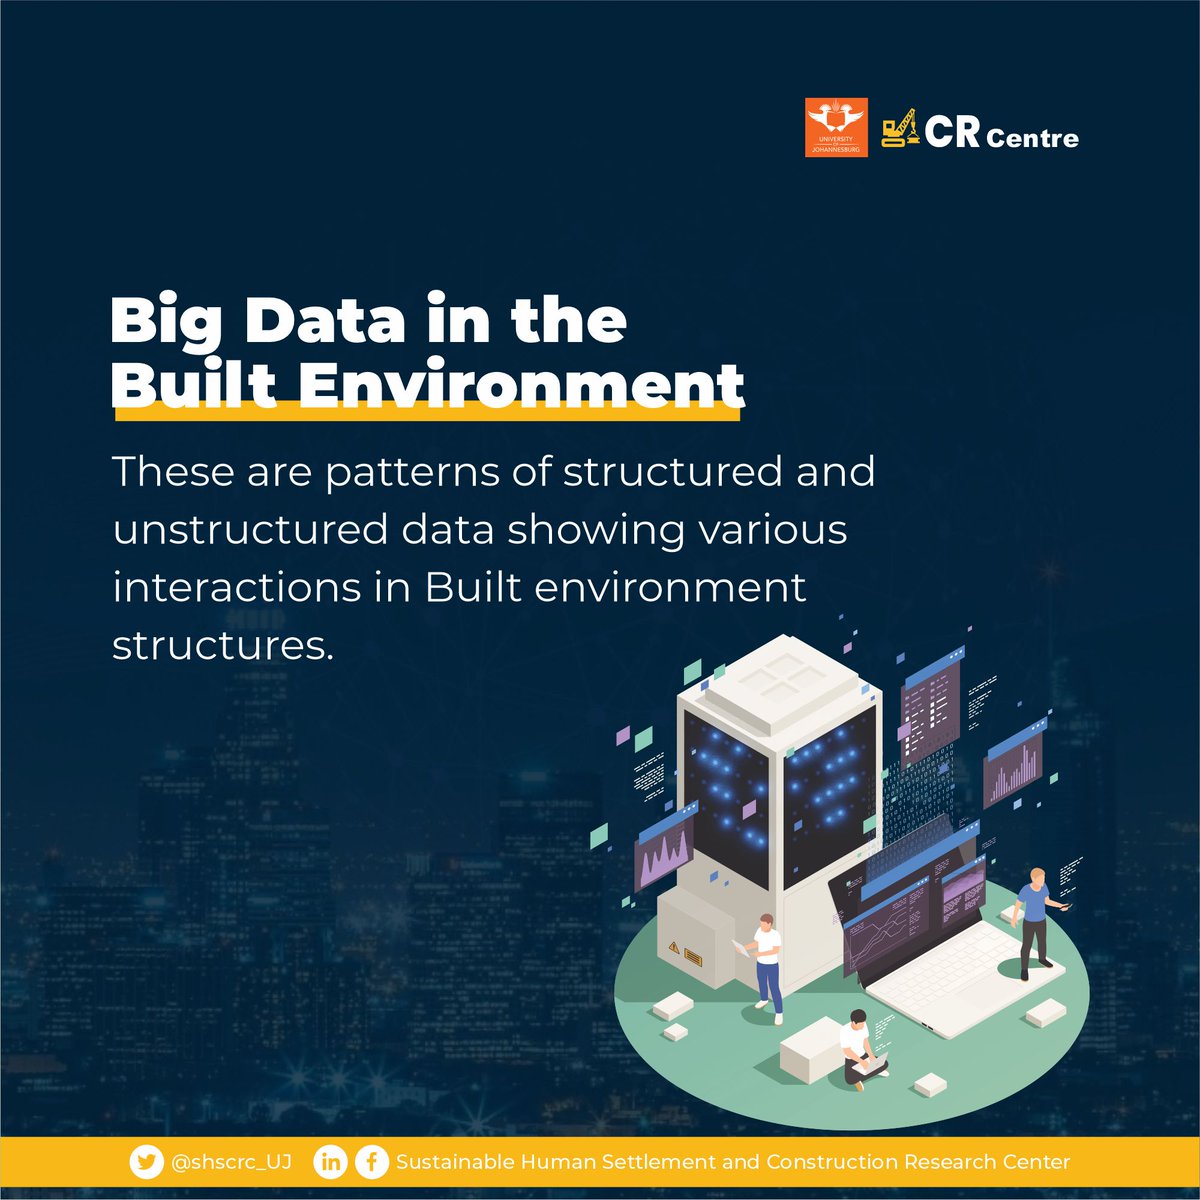 The @shscrc_UJ at the @go2uj has expertise in data utilization in the construction industry and the built environment via research on the applications of #buildinginformationmodeling, #blockchaintechnology, and #cyberphysicalsystems.